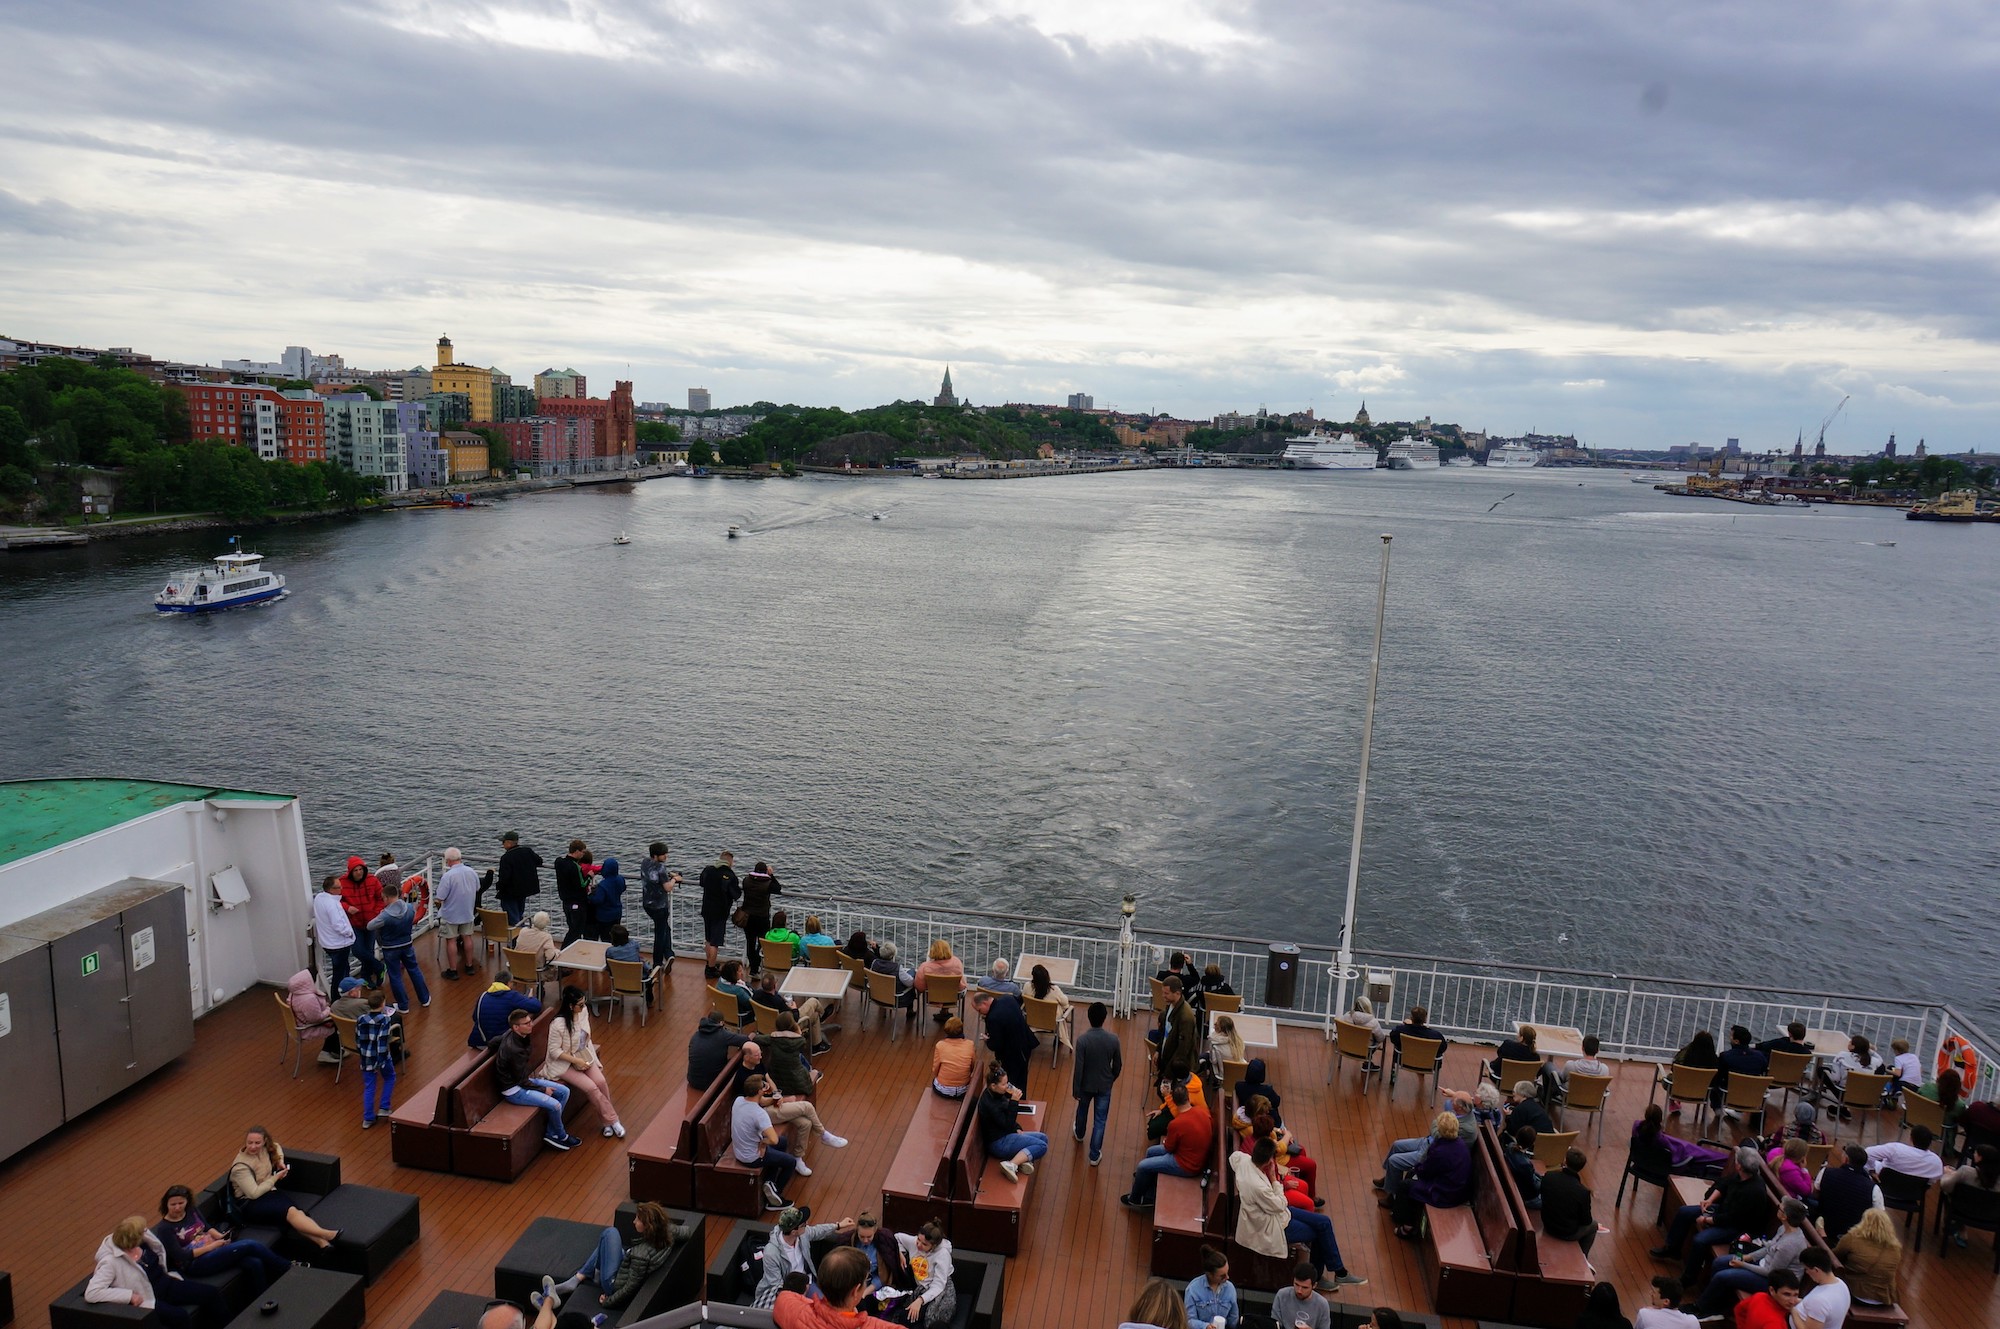 Departing Stockholm aboard a ferry.